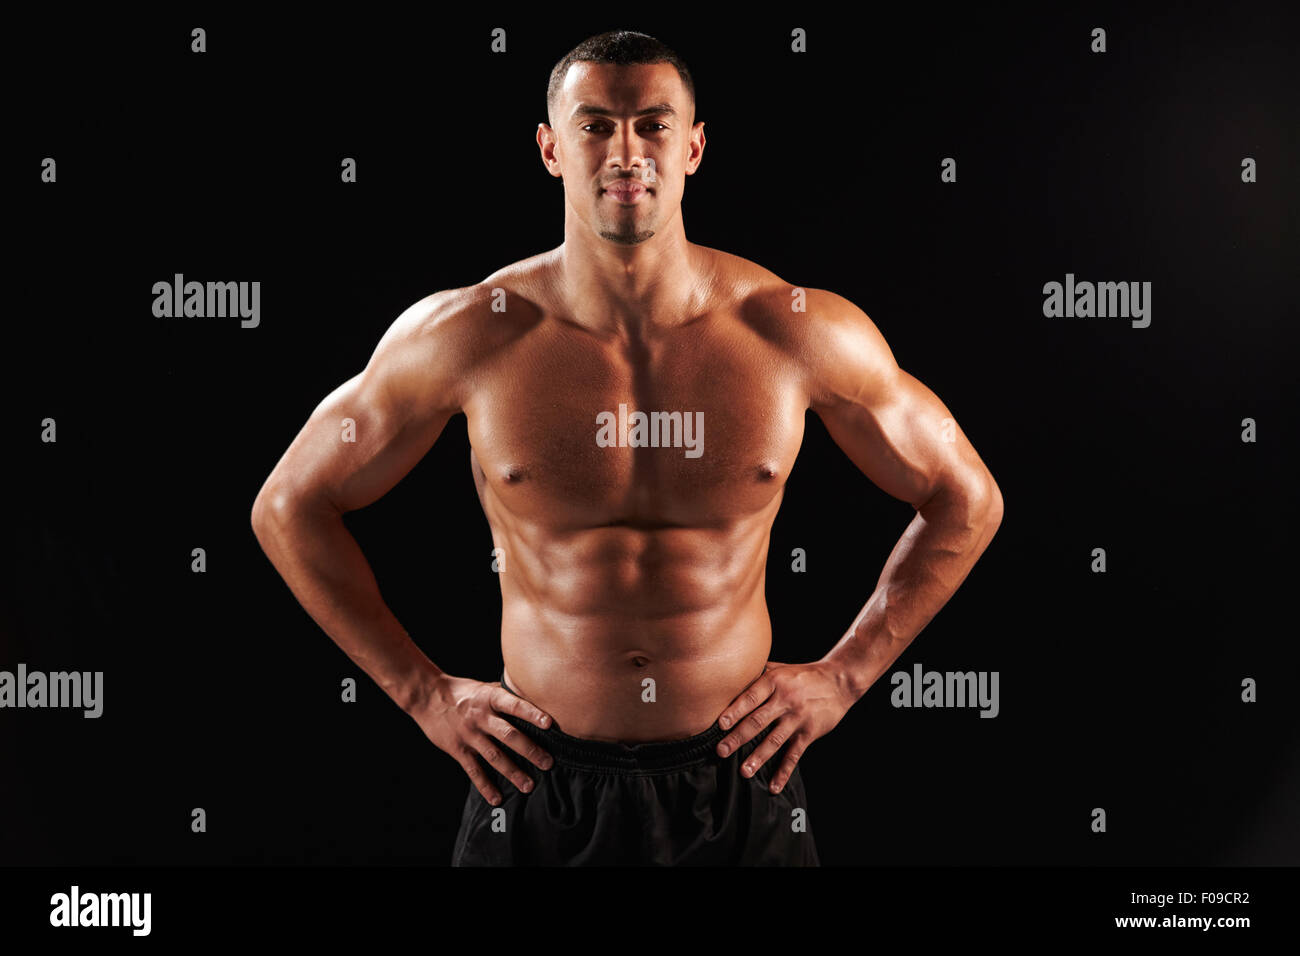 Smiling bare chested male body builder with hands on hips Stock Photo